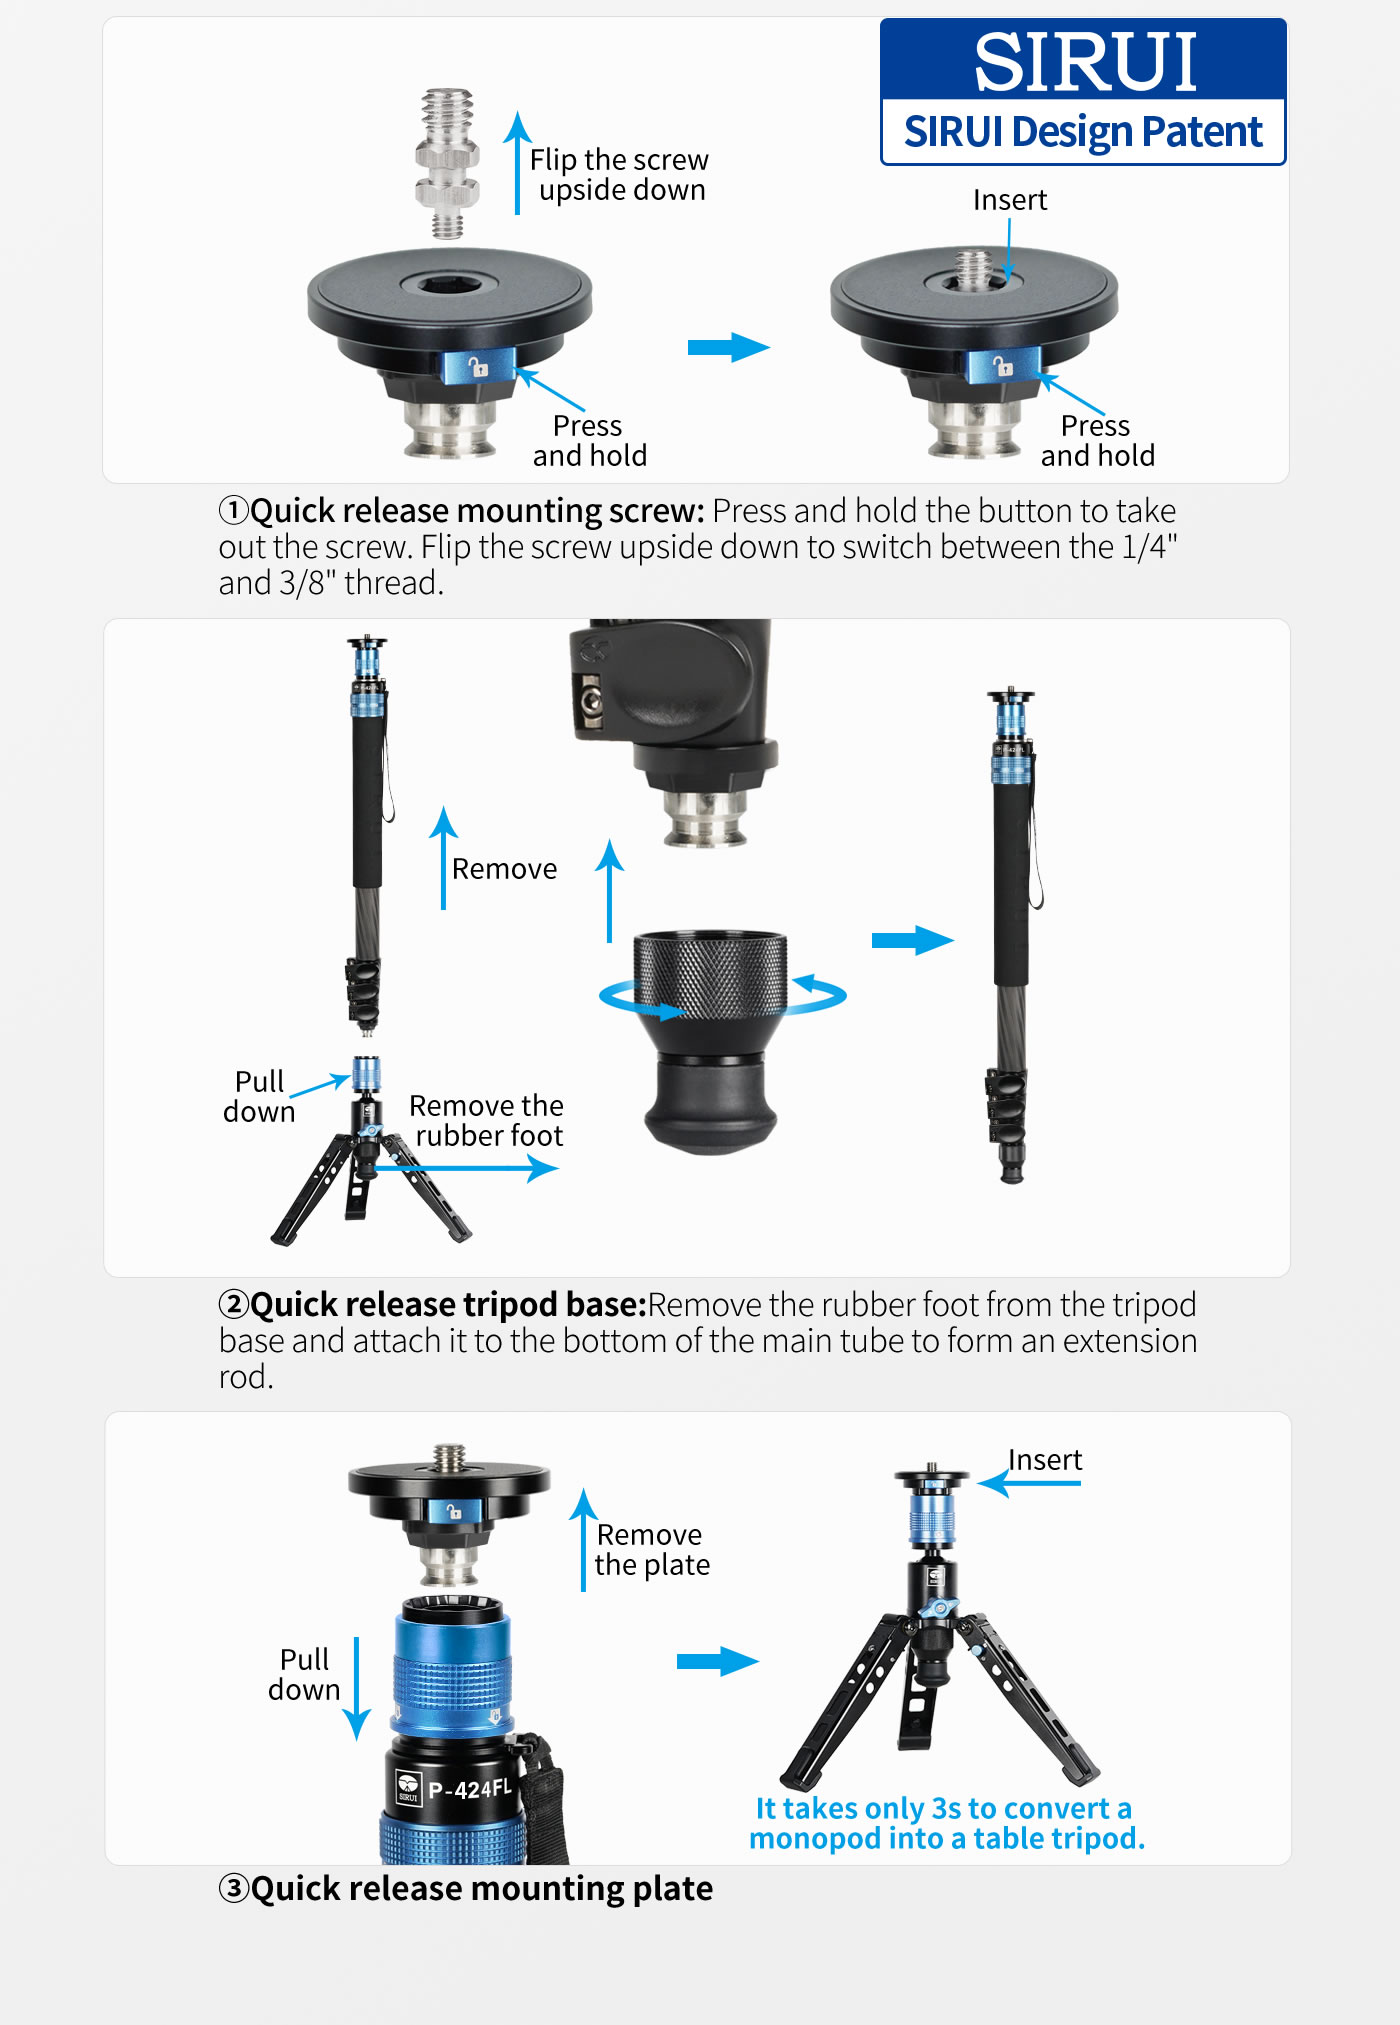 The monopod features a quick-release system